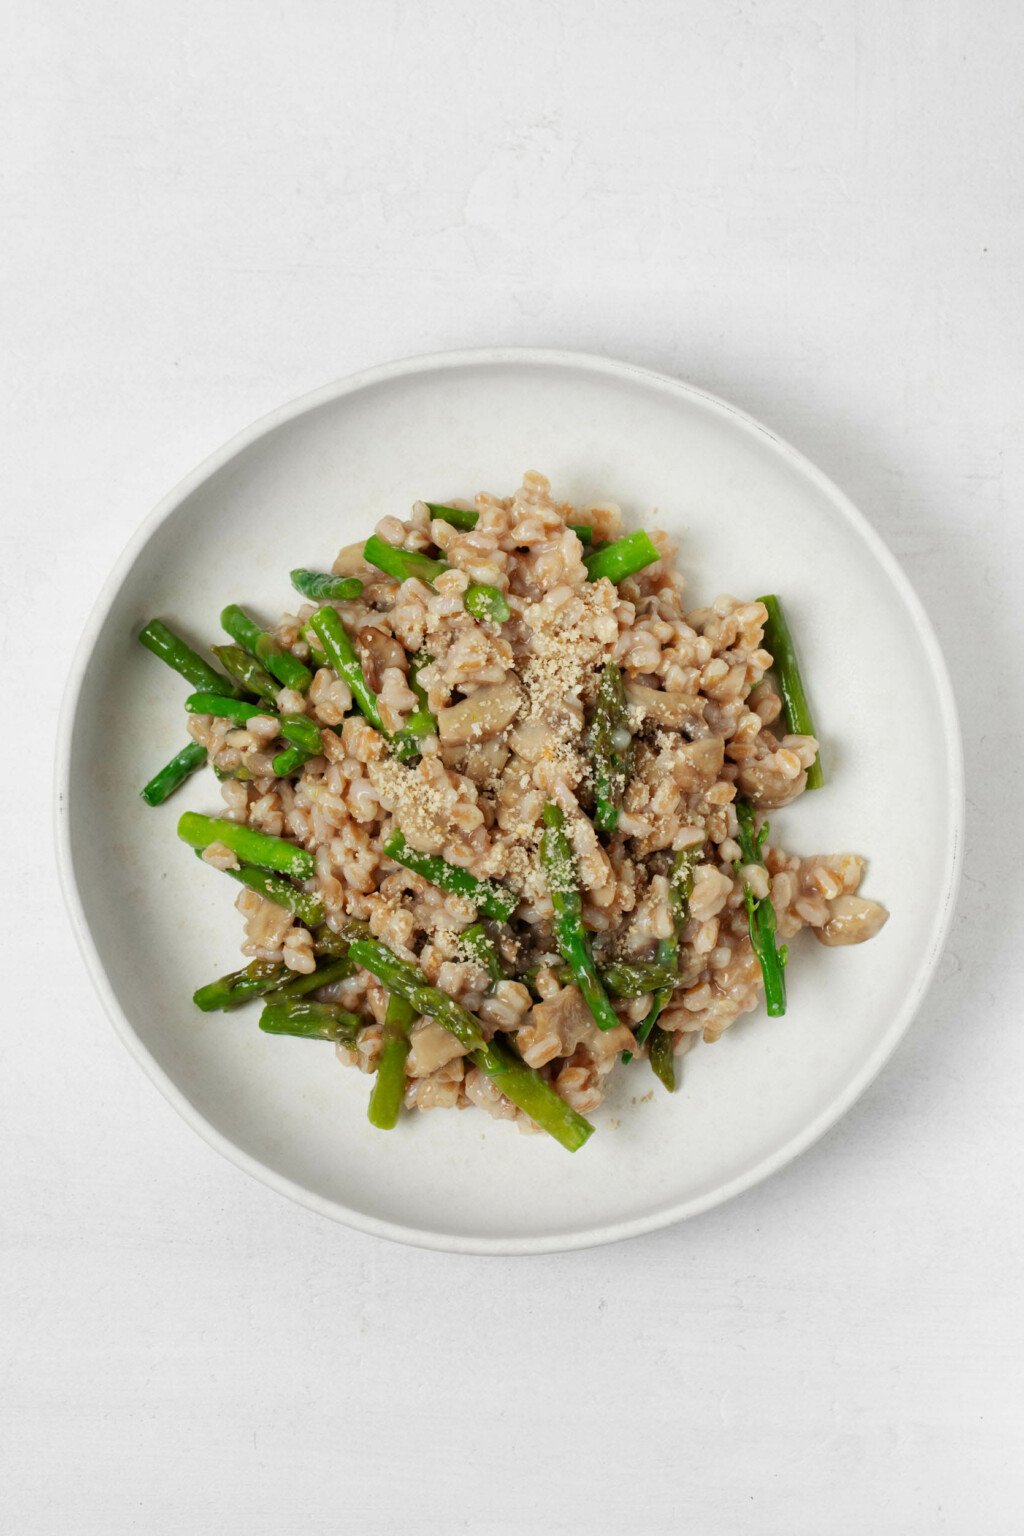 A round, rimmed white plate holds a vegan barley risotto with mushrooms and bright green asparagus pieces.